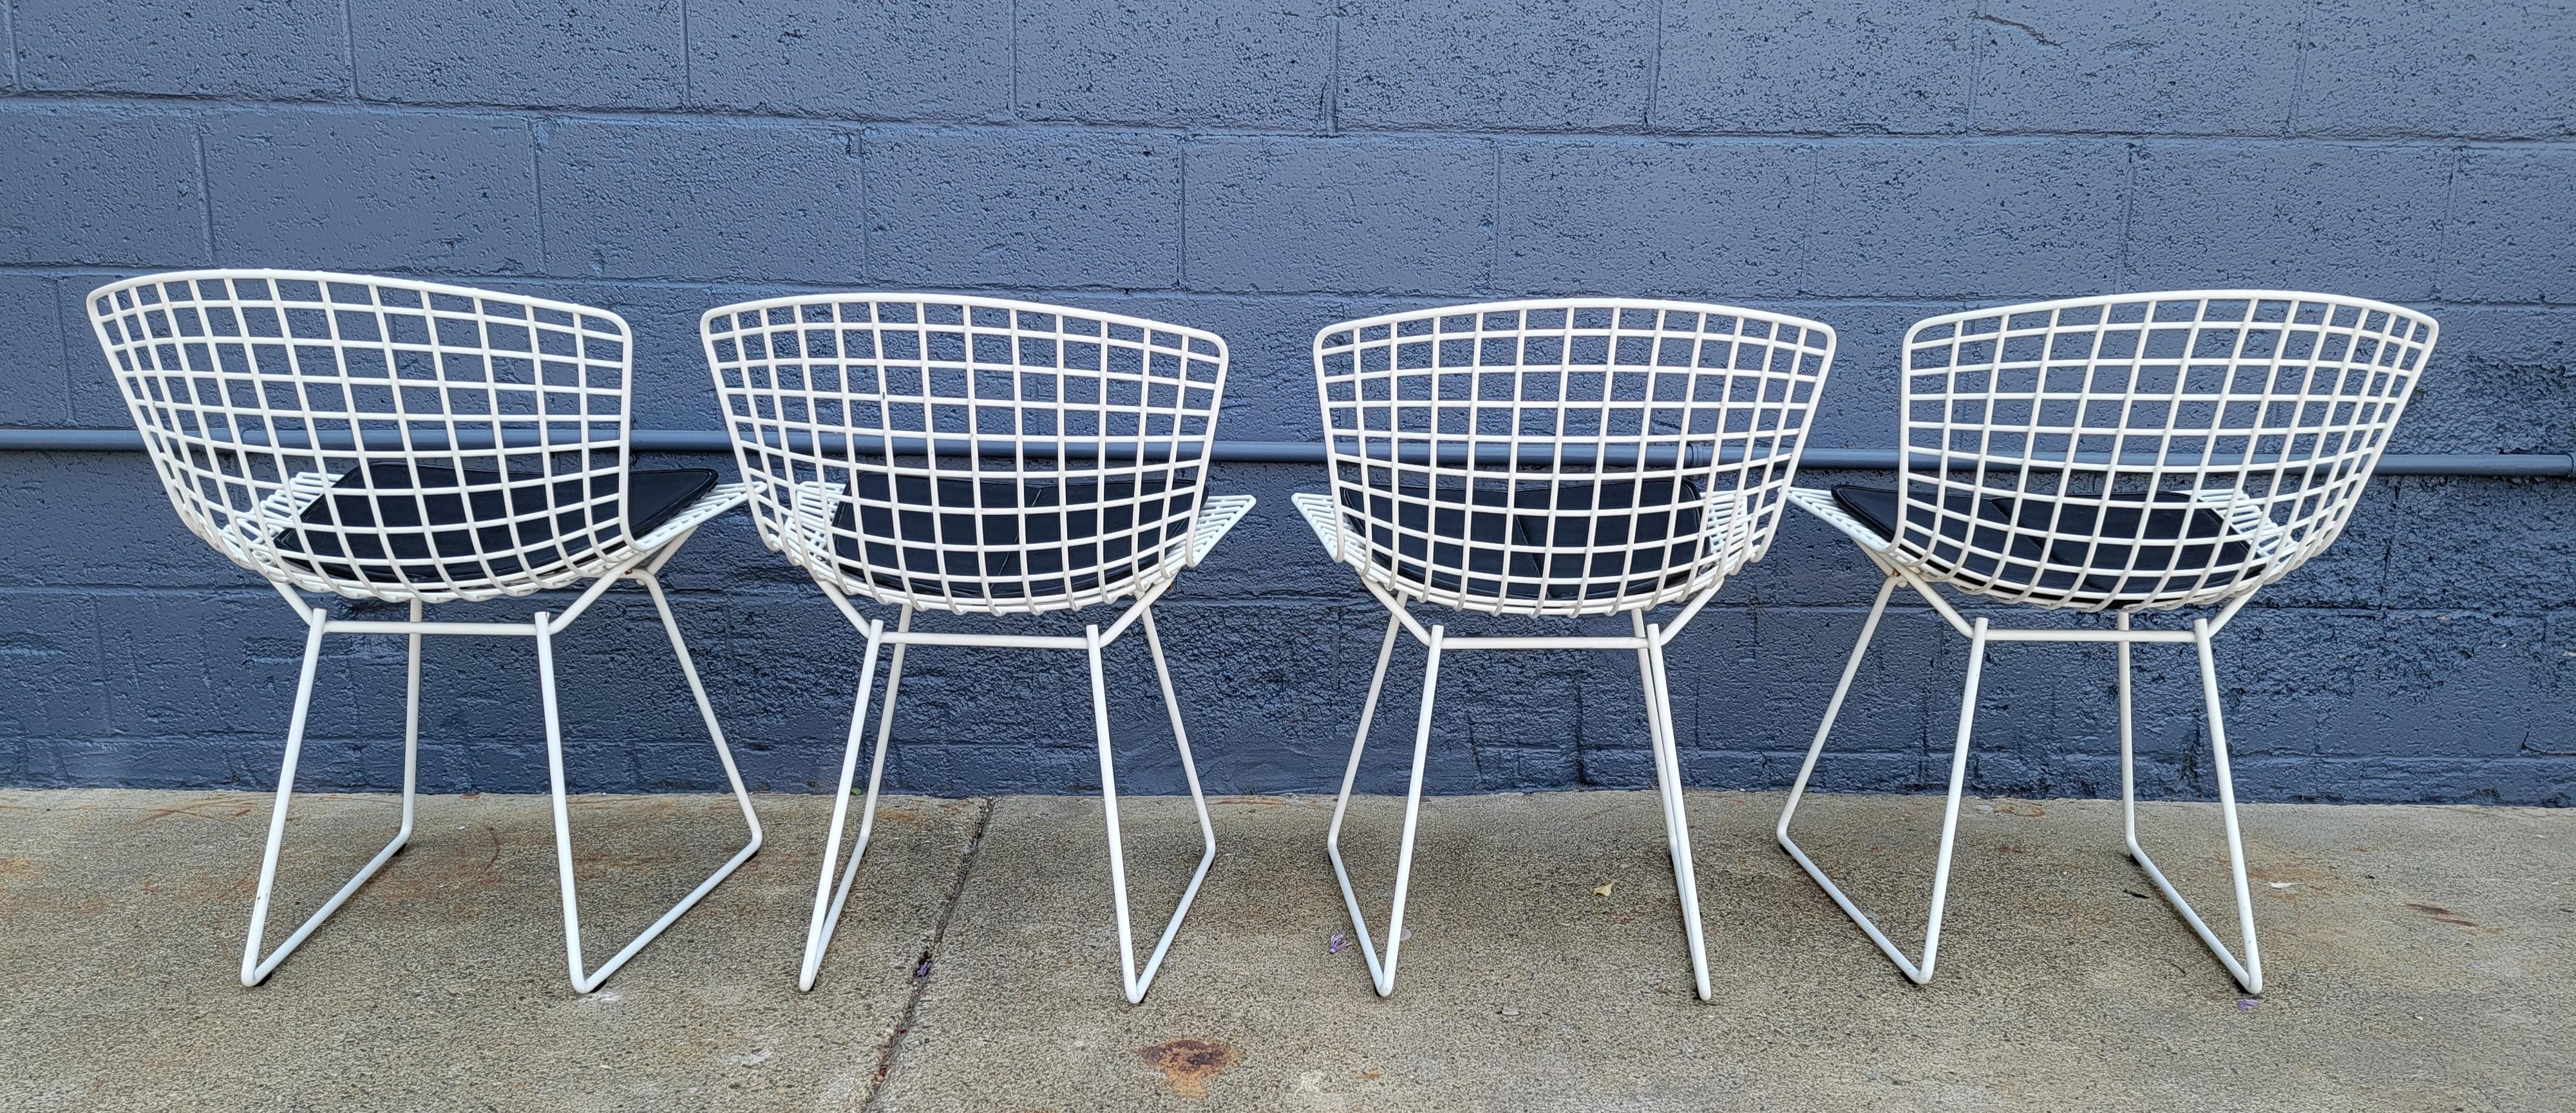 A vintage set of 4 wire dining chairs designed by Harry Bertoia for Knoll. White frames with original black seat cushion. Good vintage condition with age appropriate wear from use.